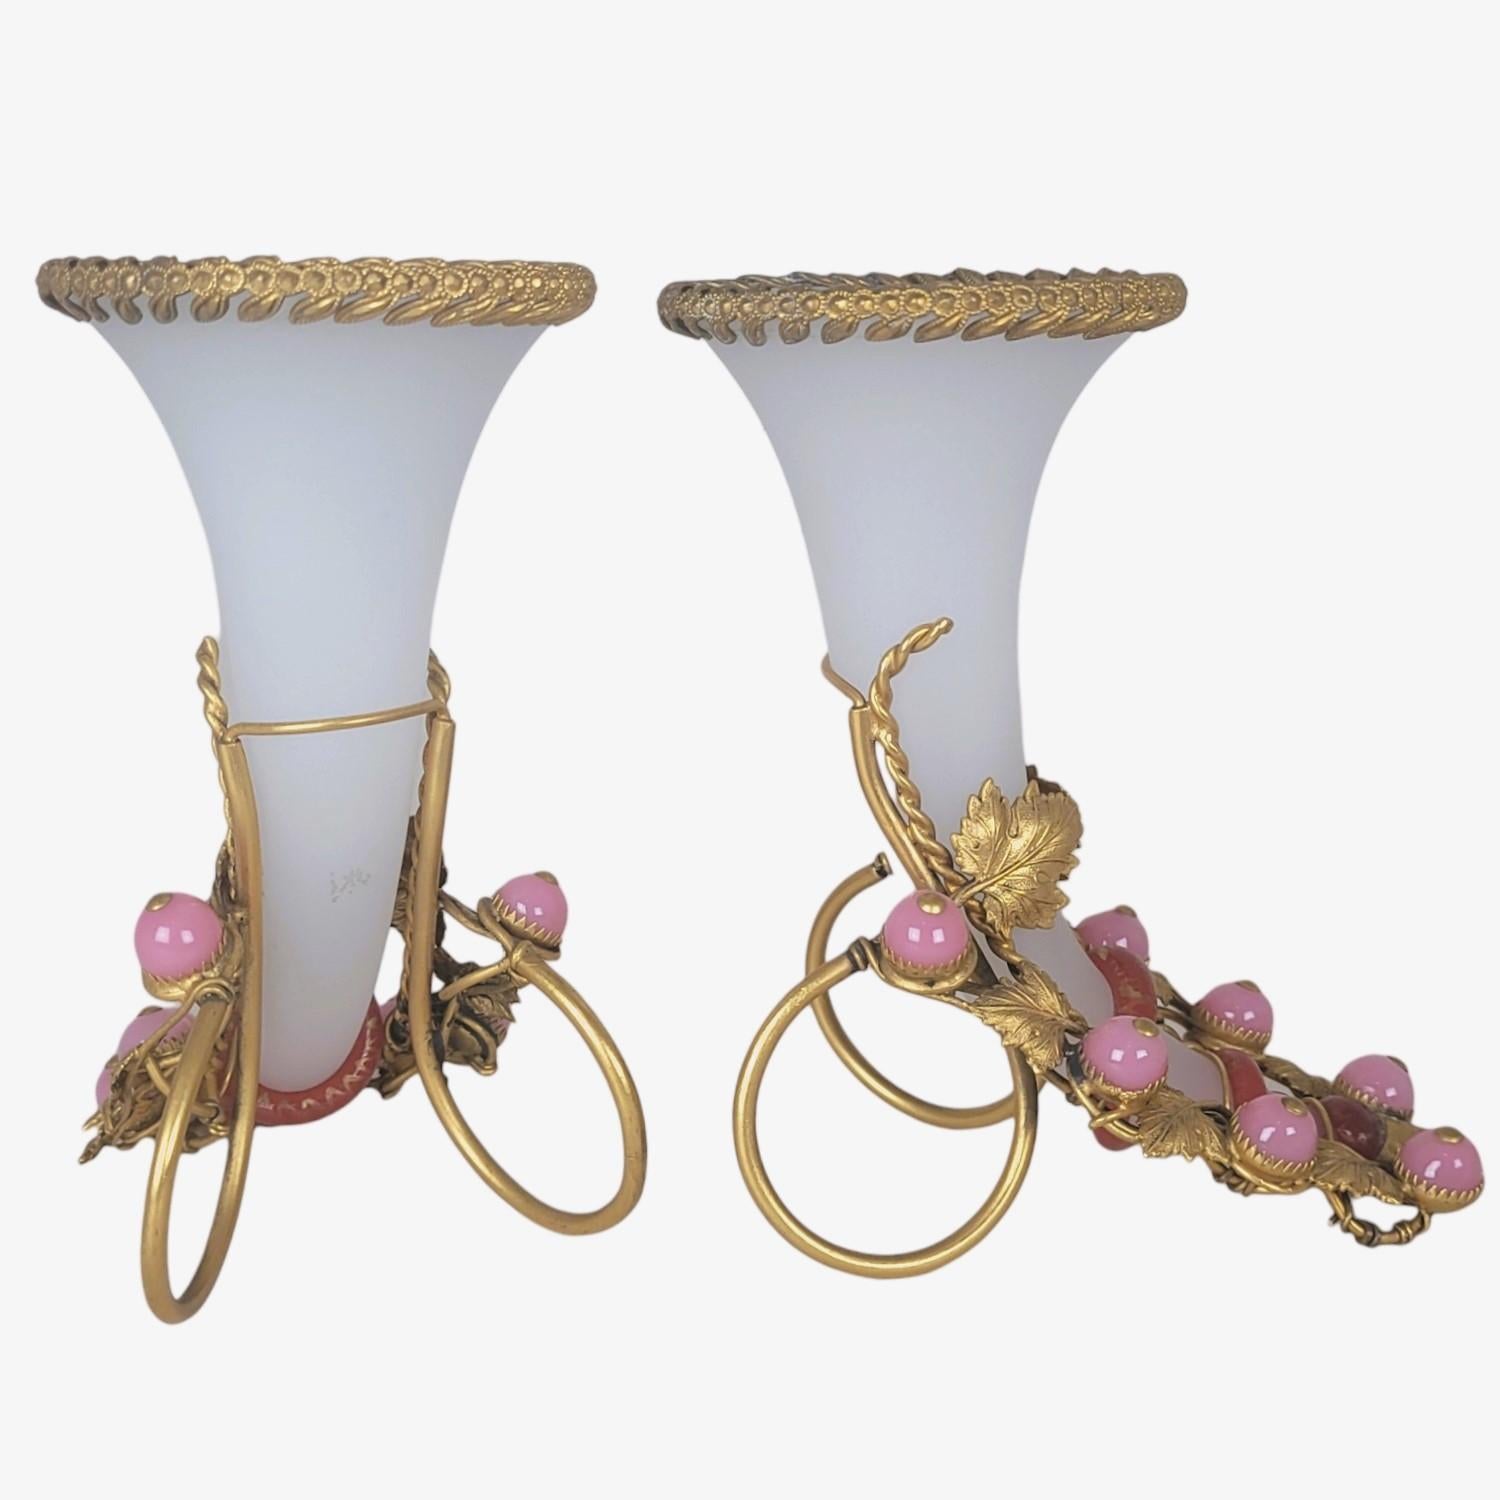 3 Bouquet Holder Vases, Opaline And Pomponne, Napoleon III, 19th Century For Sale 7